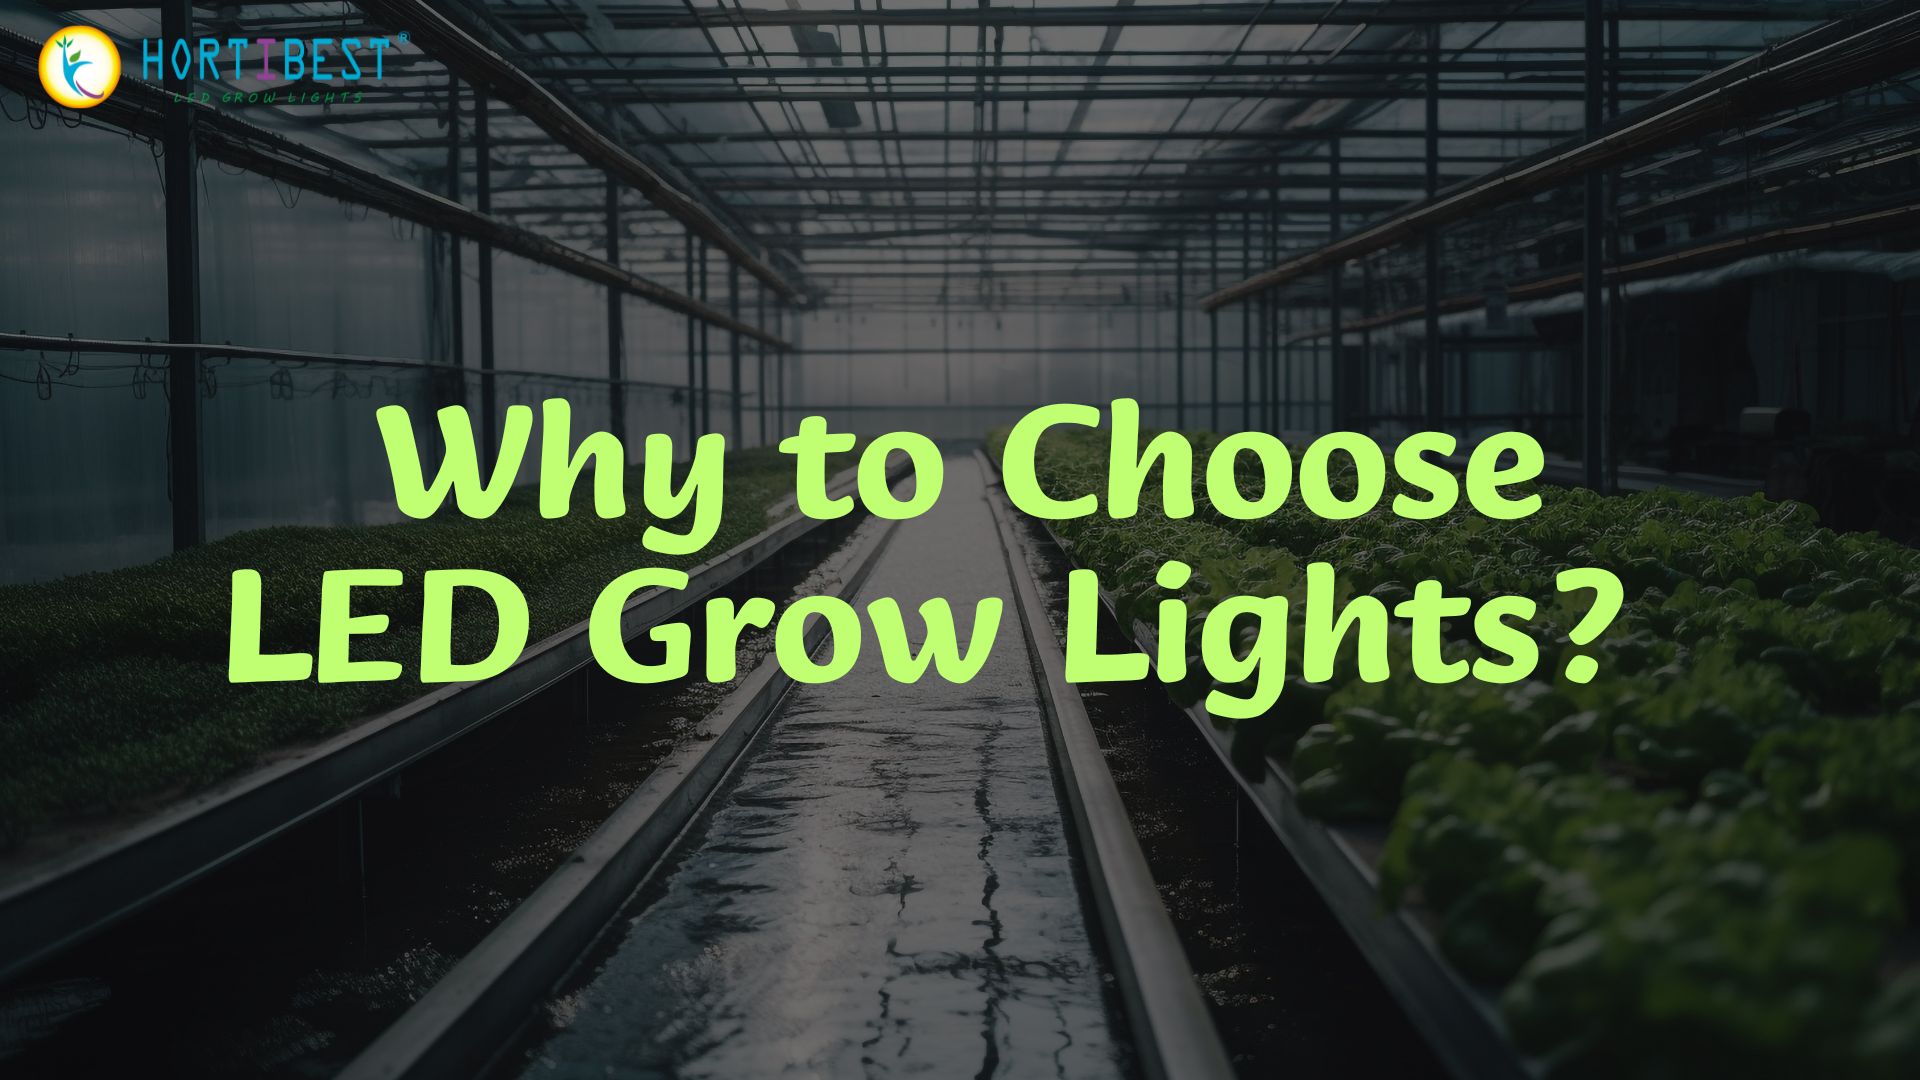 Why to Choose LED Grow Lights?